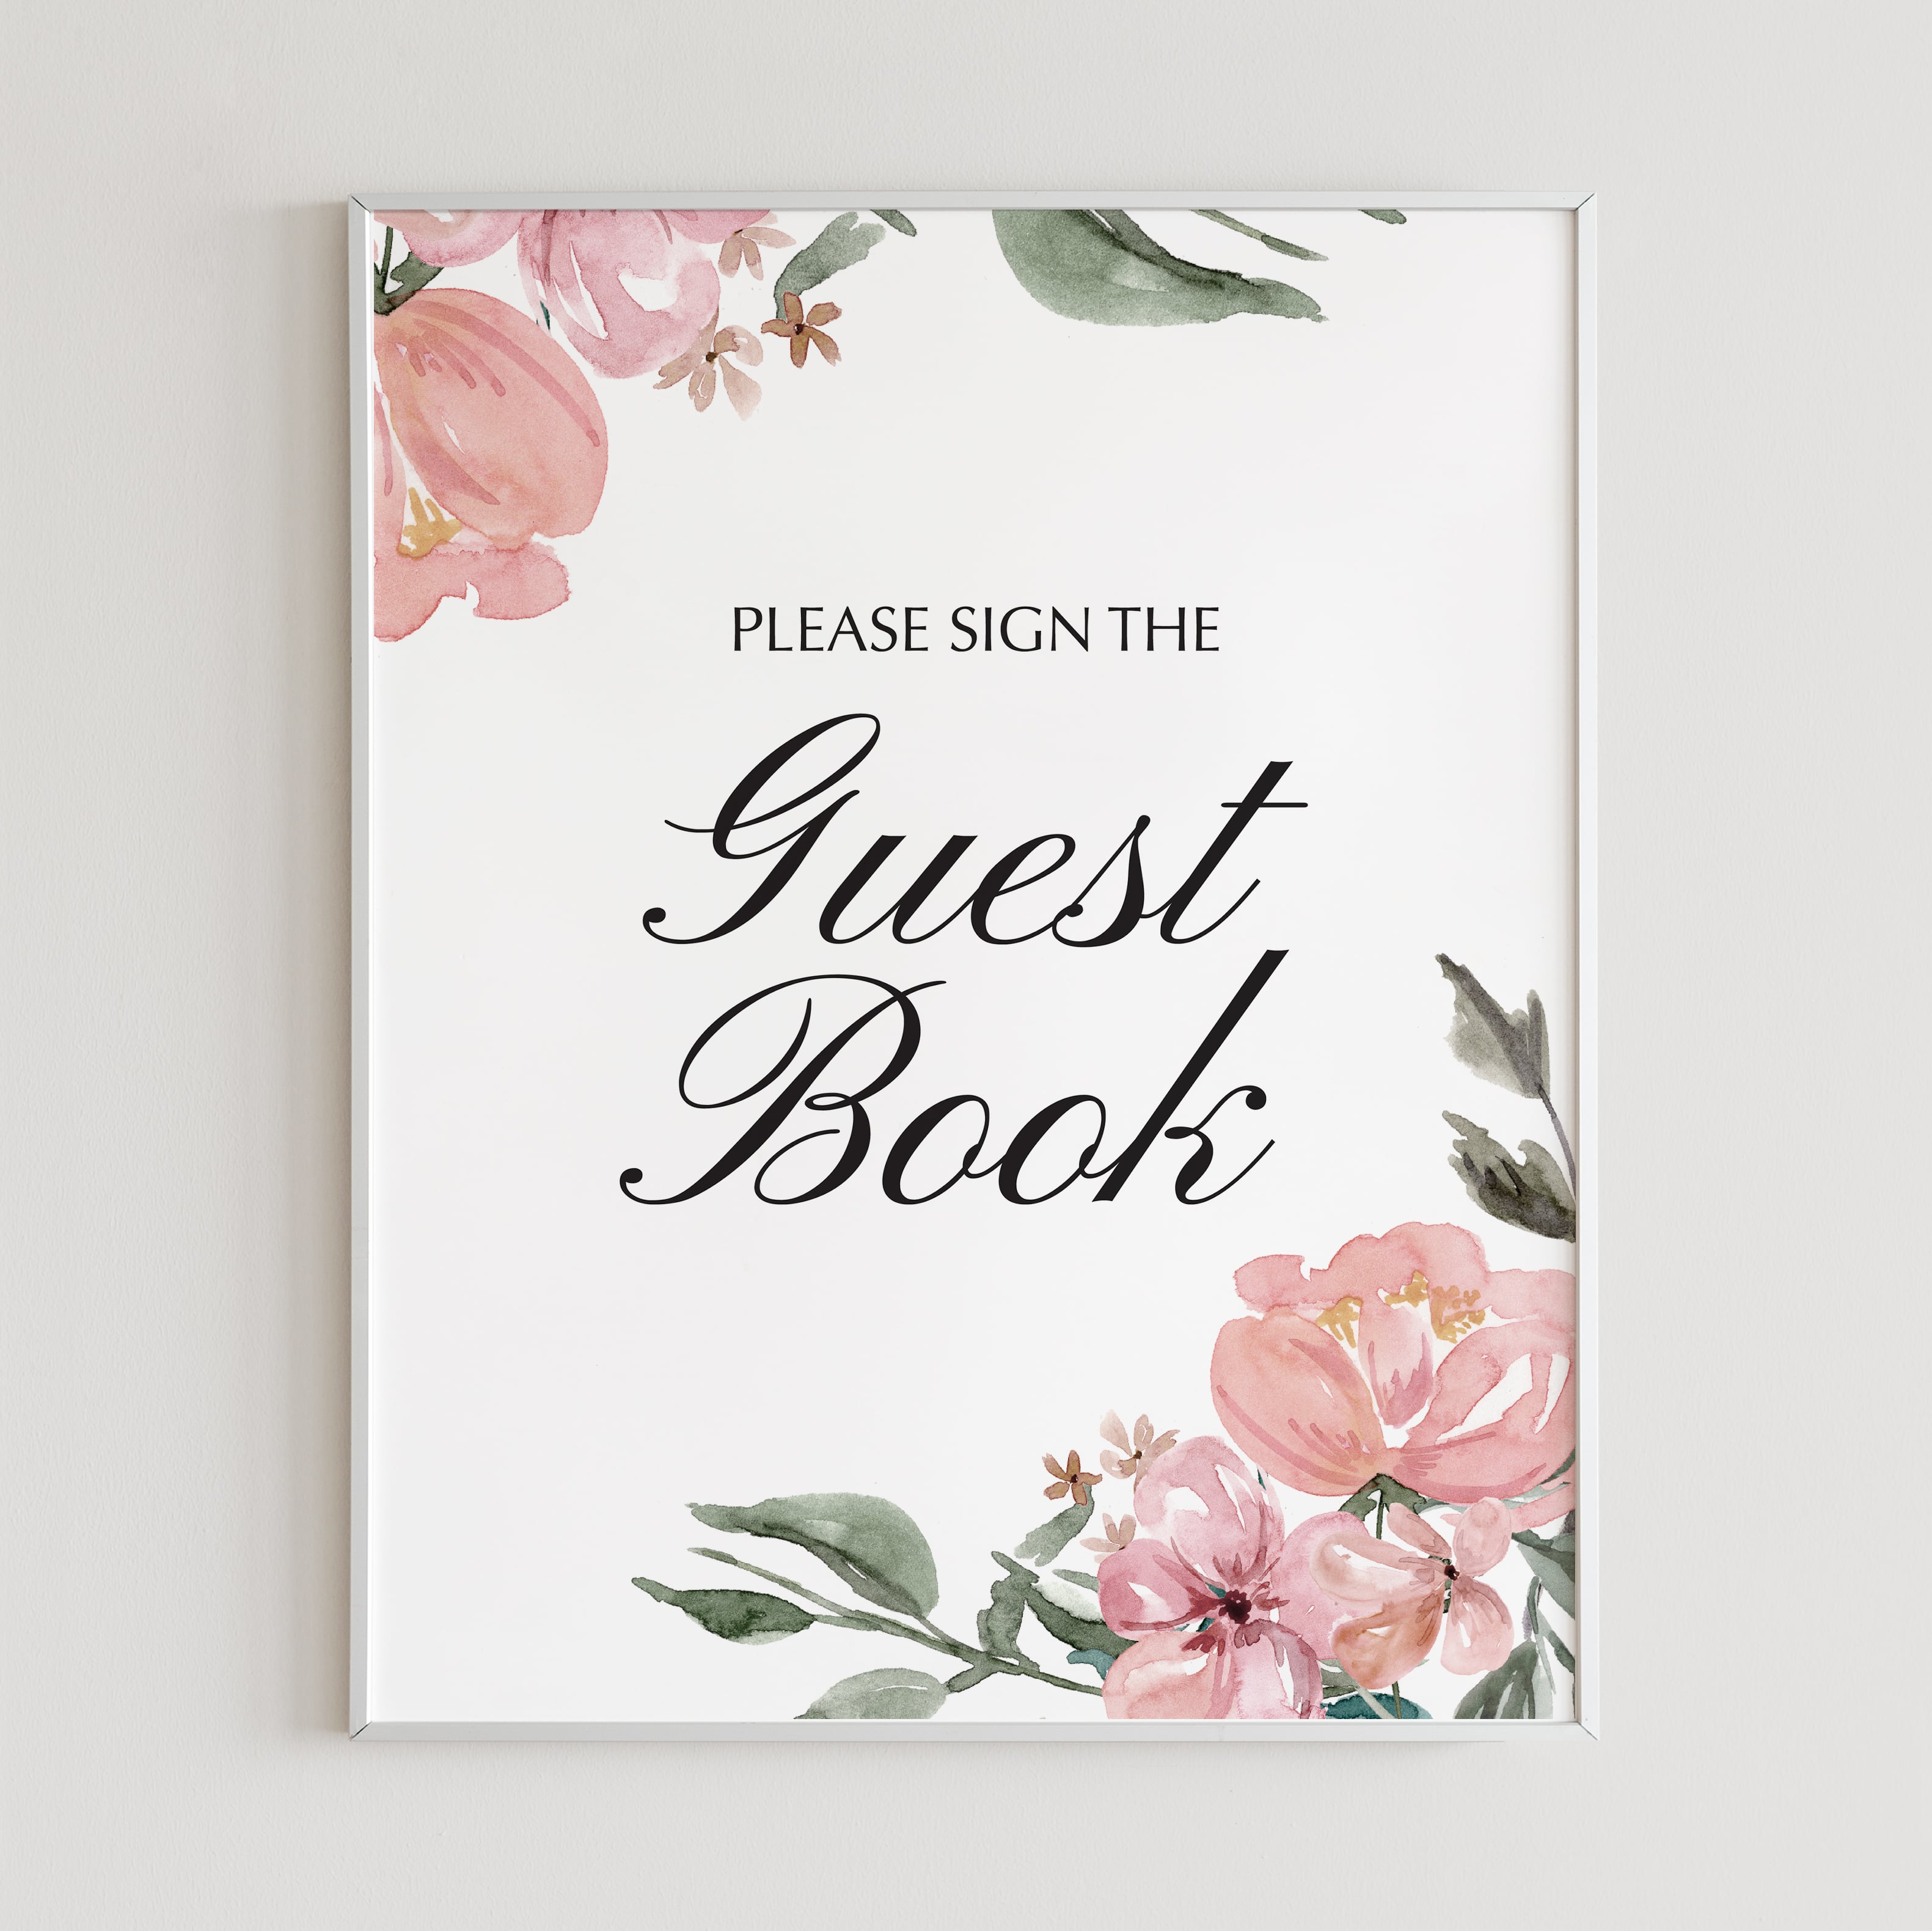 Watercolor florals please sign the guest book sign by LittleSizzle